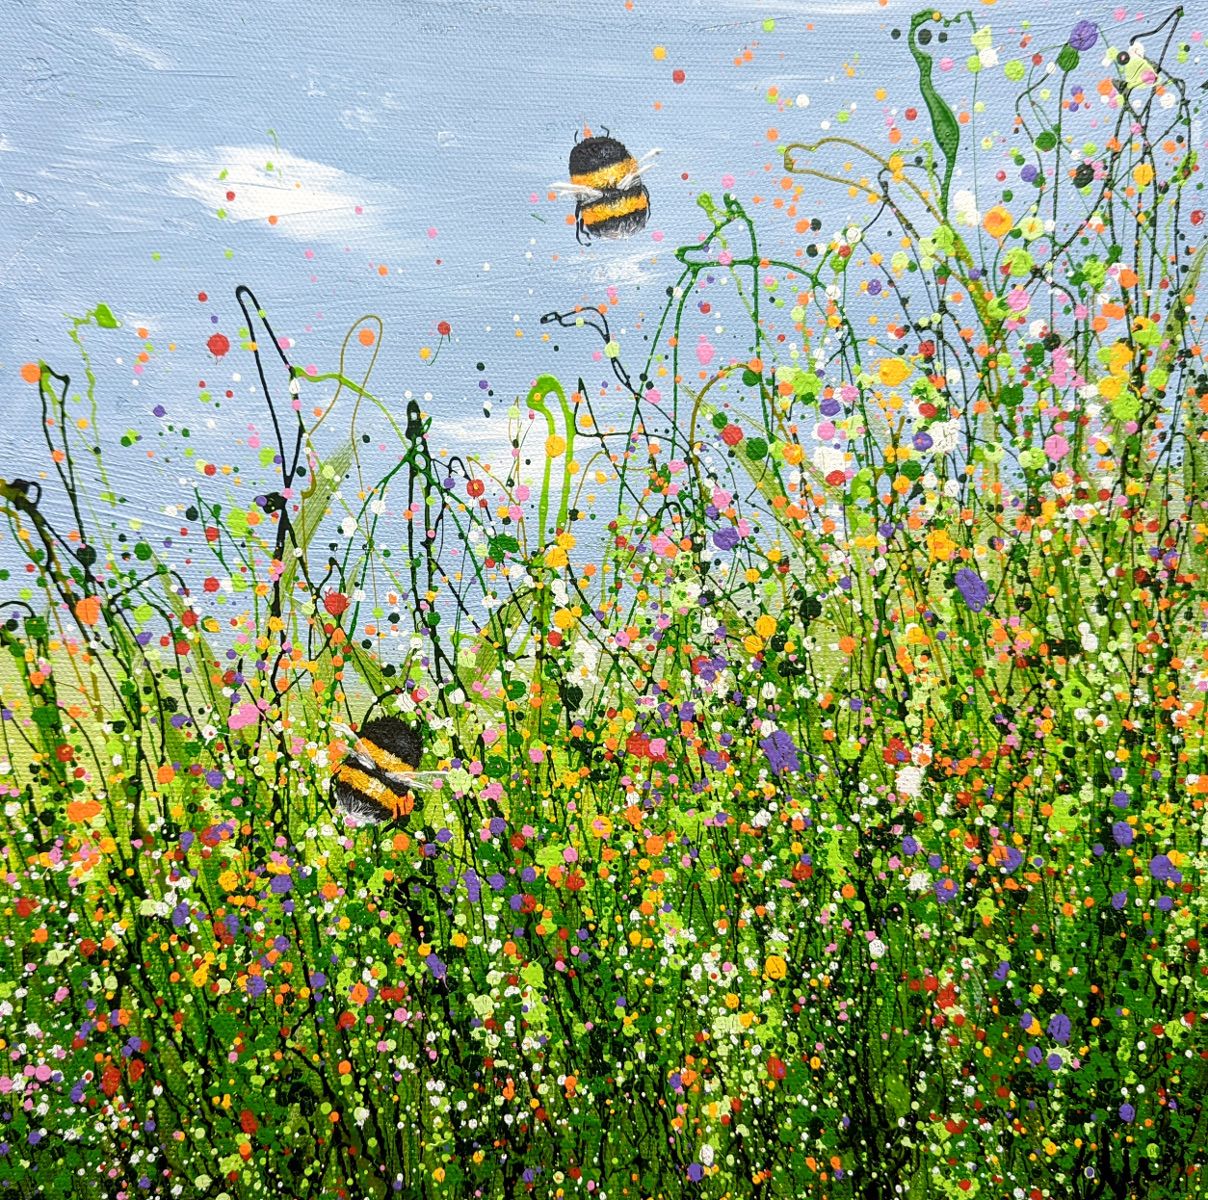 Bumbling Meadows by Lucy Moore